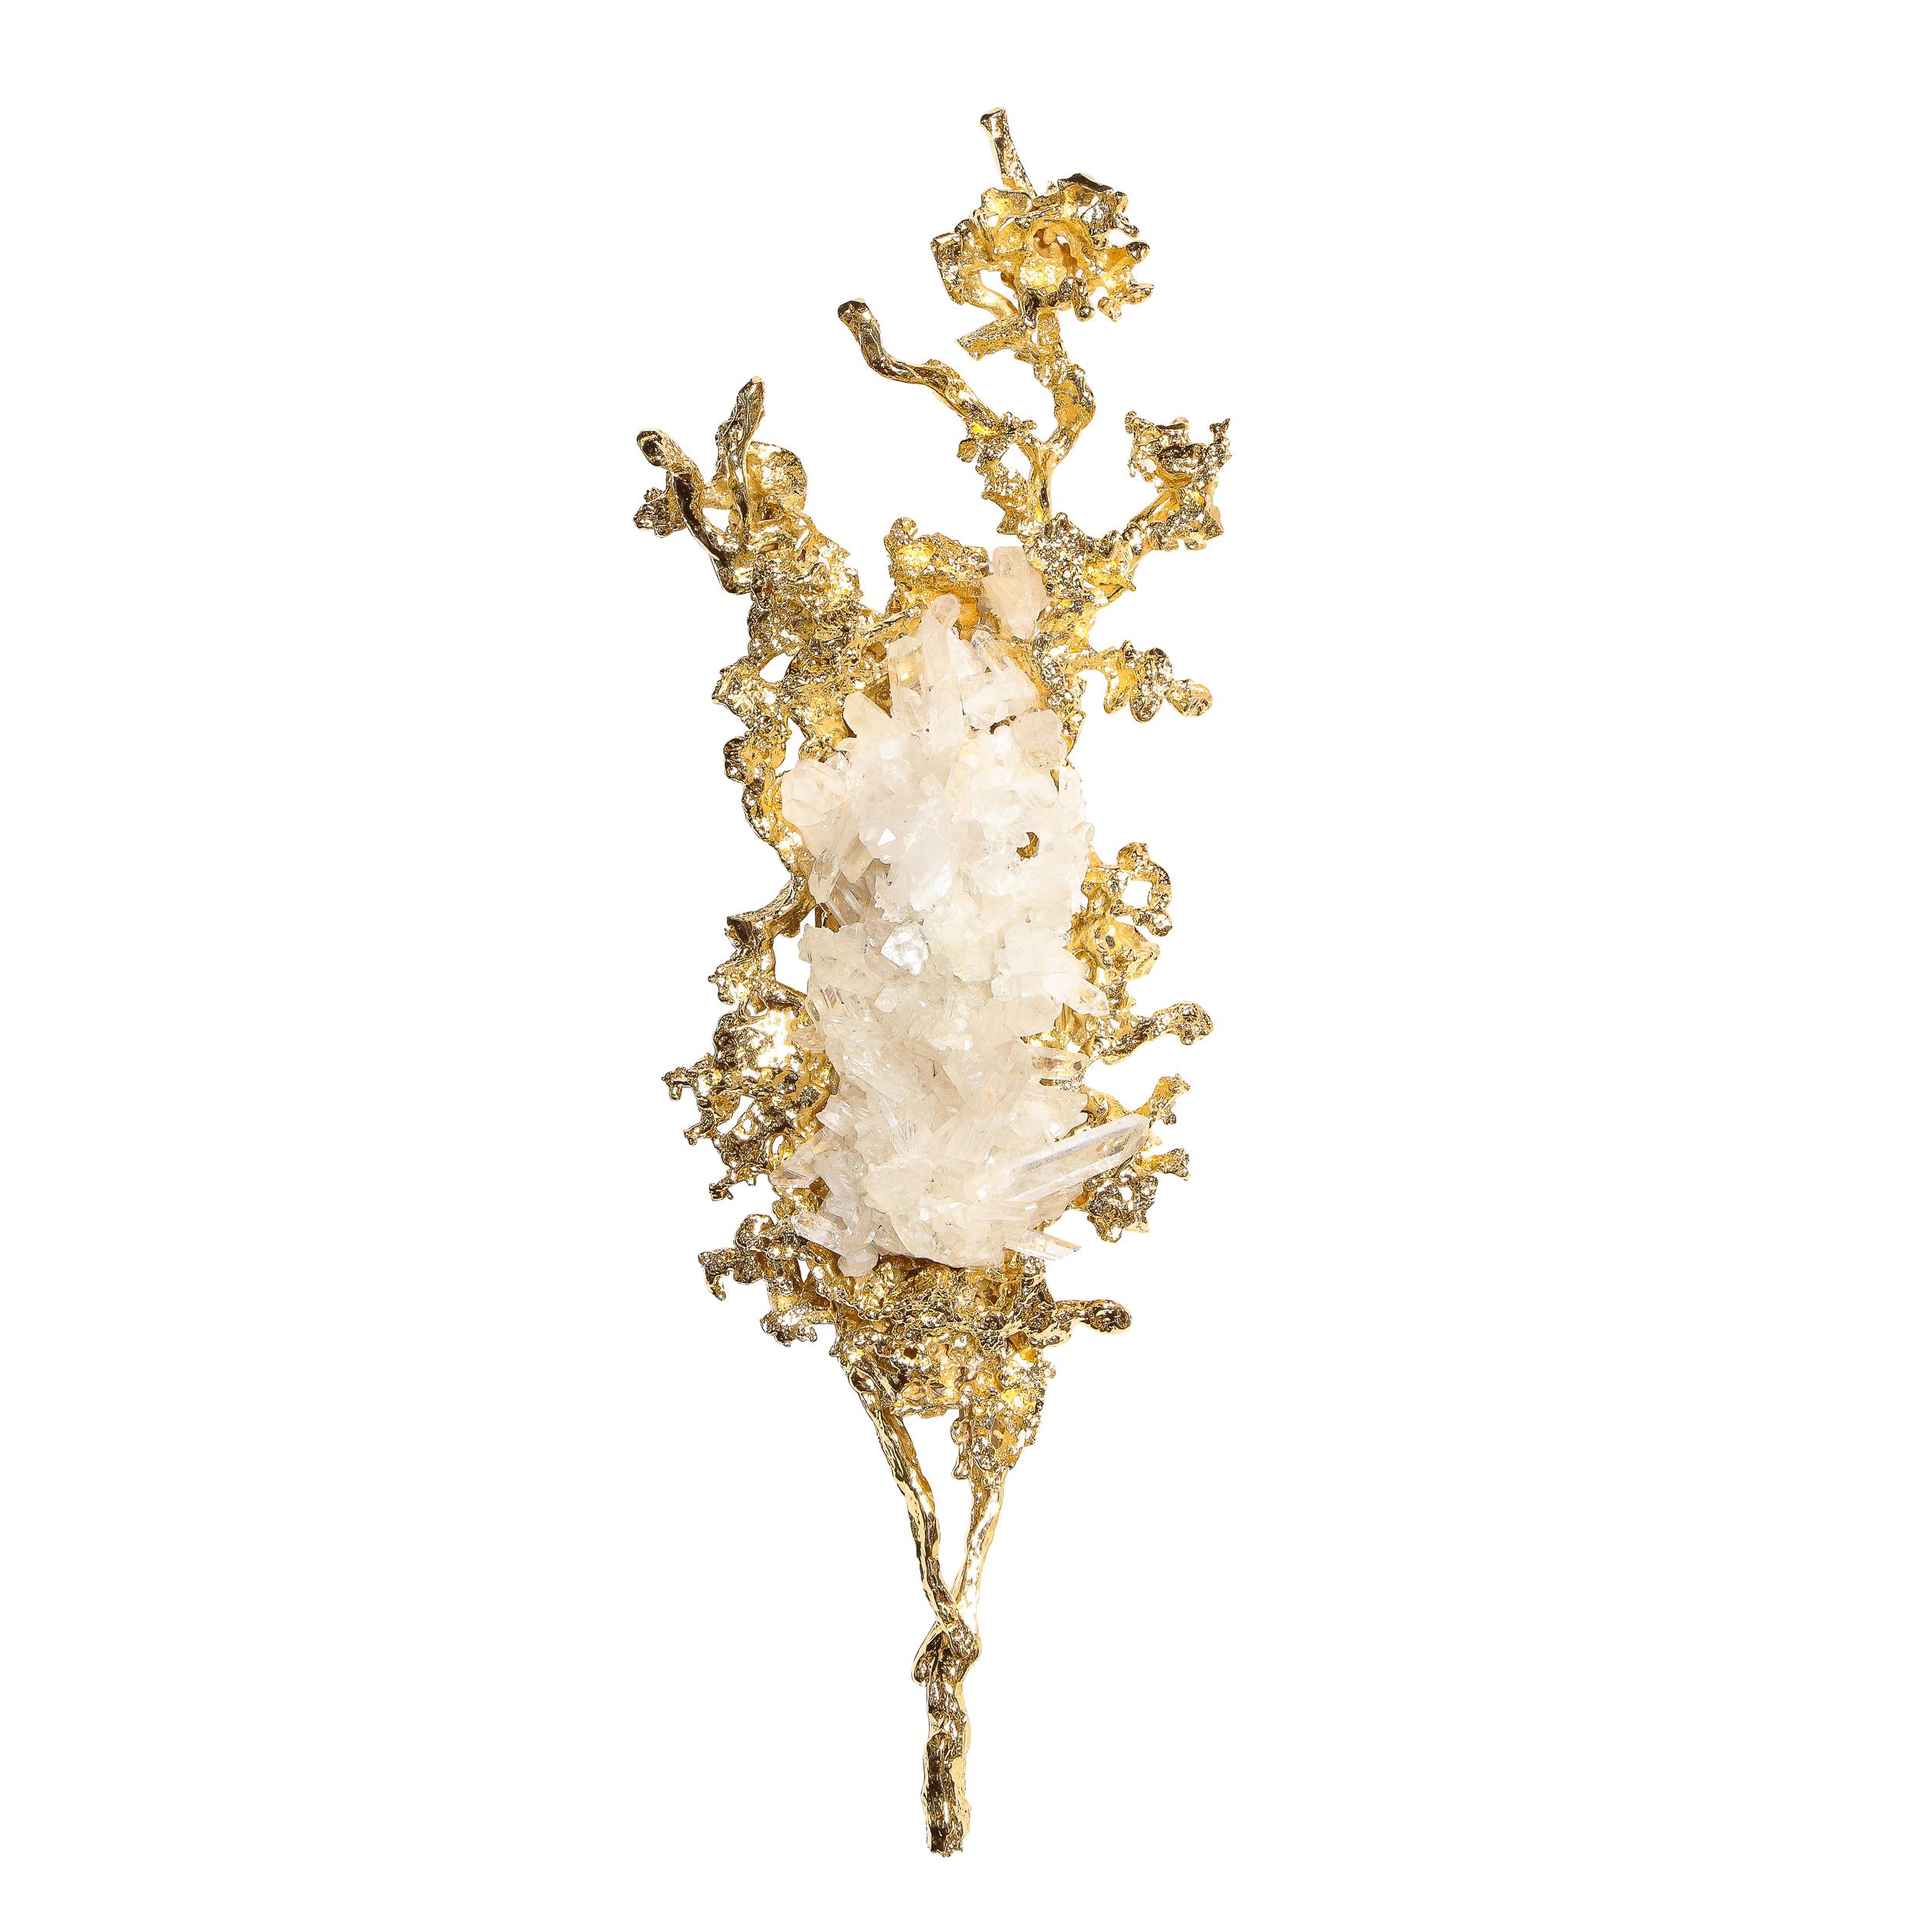 This stunning and sophisticated pair of modernist sconces were realized by the celebrated French artist Claude Boeltz. They feature graphic organic forms- recalling both oceanic and terrestrial forms from coral to tree branches- realized in exploded